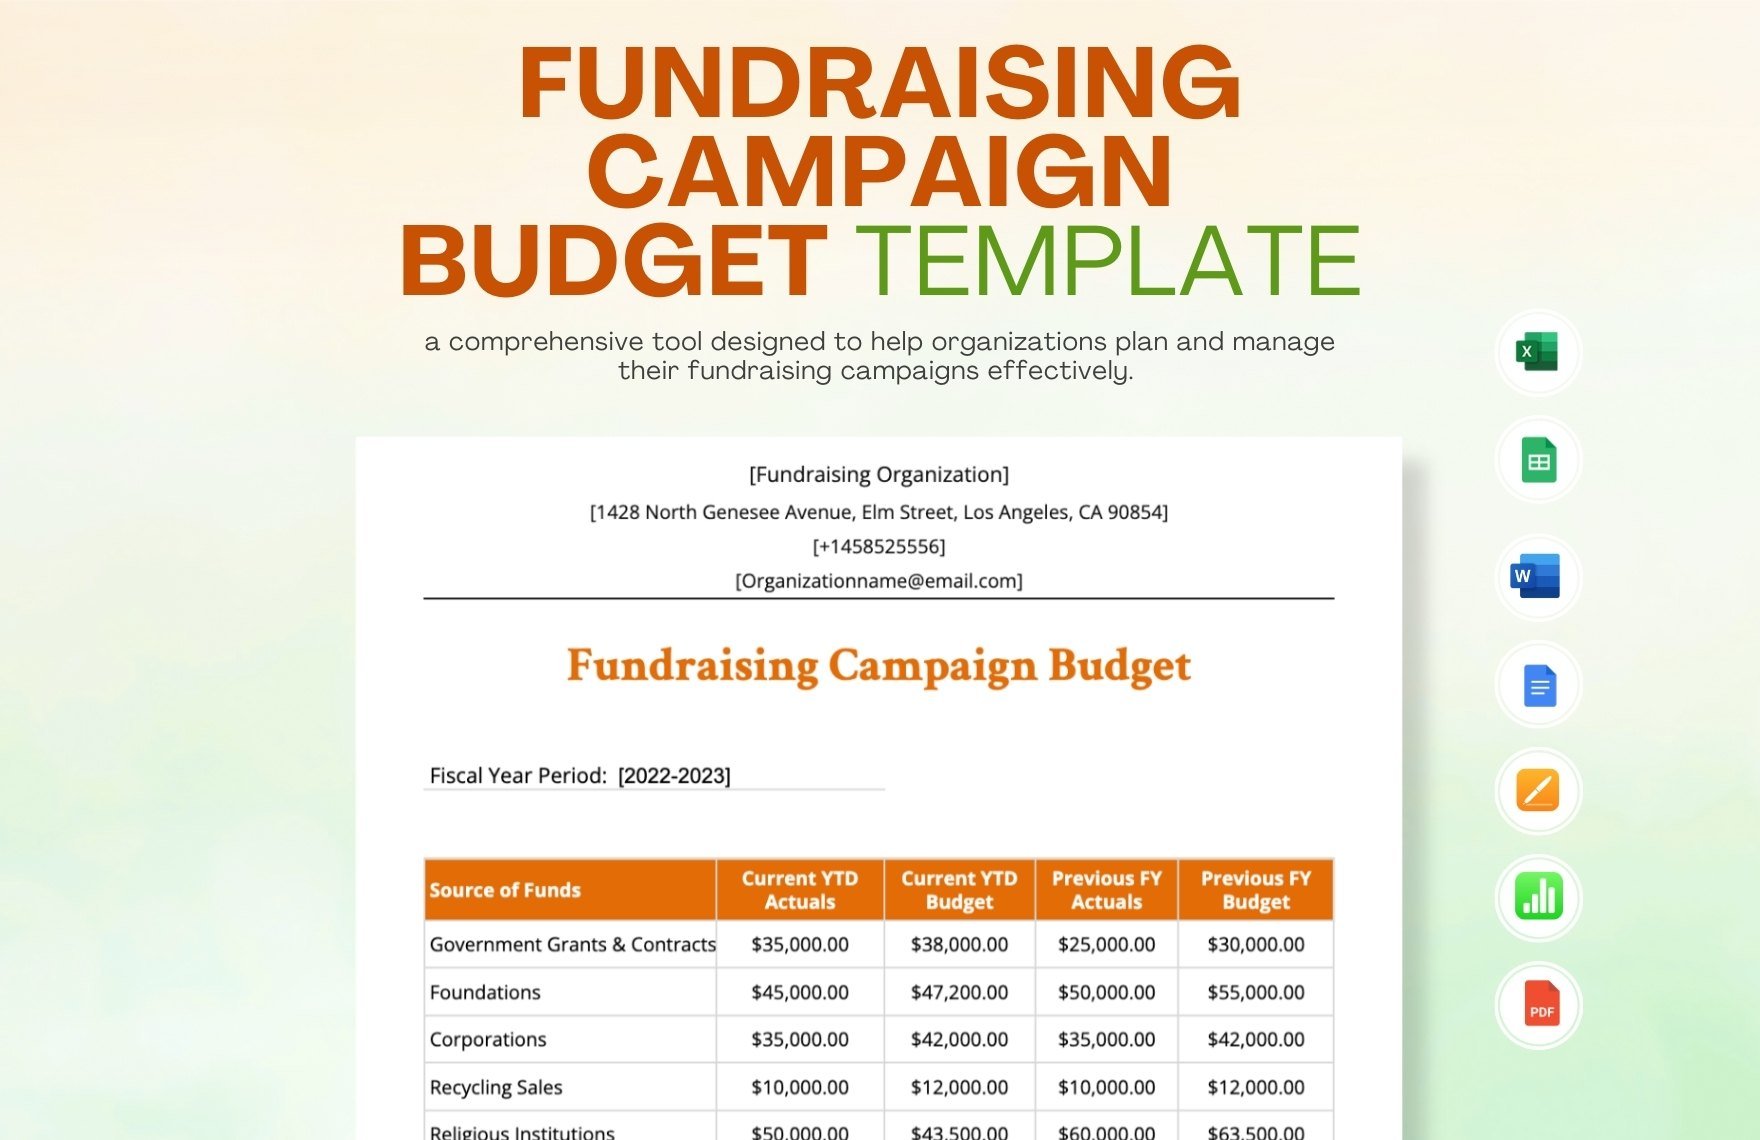 Fundraising Campaign Budget Template in Word, Google Docs, Excel, PDF, Google Sheets, Apple Pages, Apple Numbers